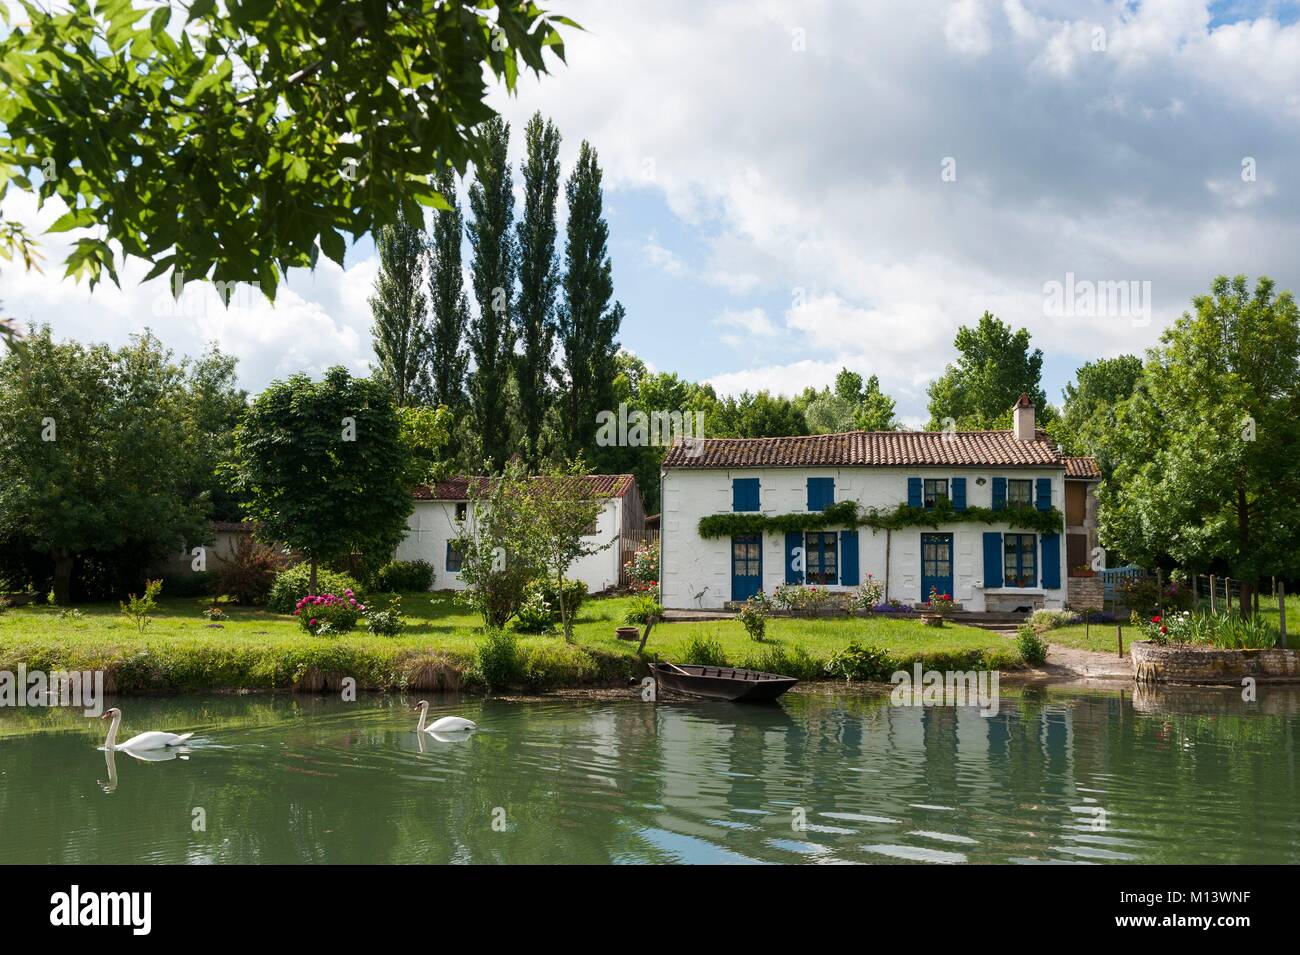 France, Deux Sevres, Coulon, Marais Poitevin interregional park labeled Grand Site of France, Marais Poitevin, Green Venice, Coulon labeled The Most Beautiful Villages of France, typical maraichine house on the edge of the Sevre Niortaise Stock Photo